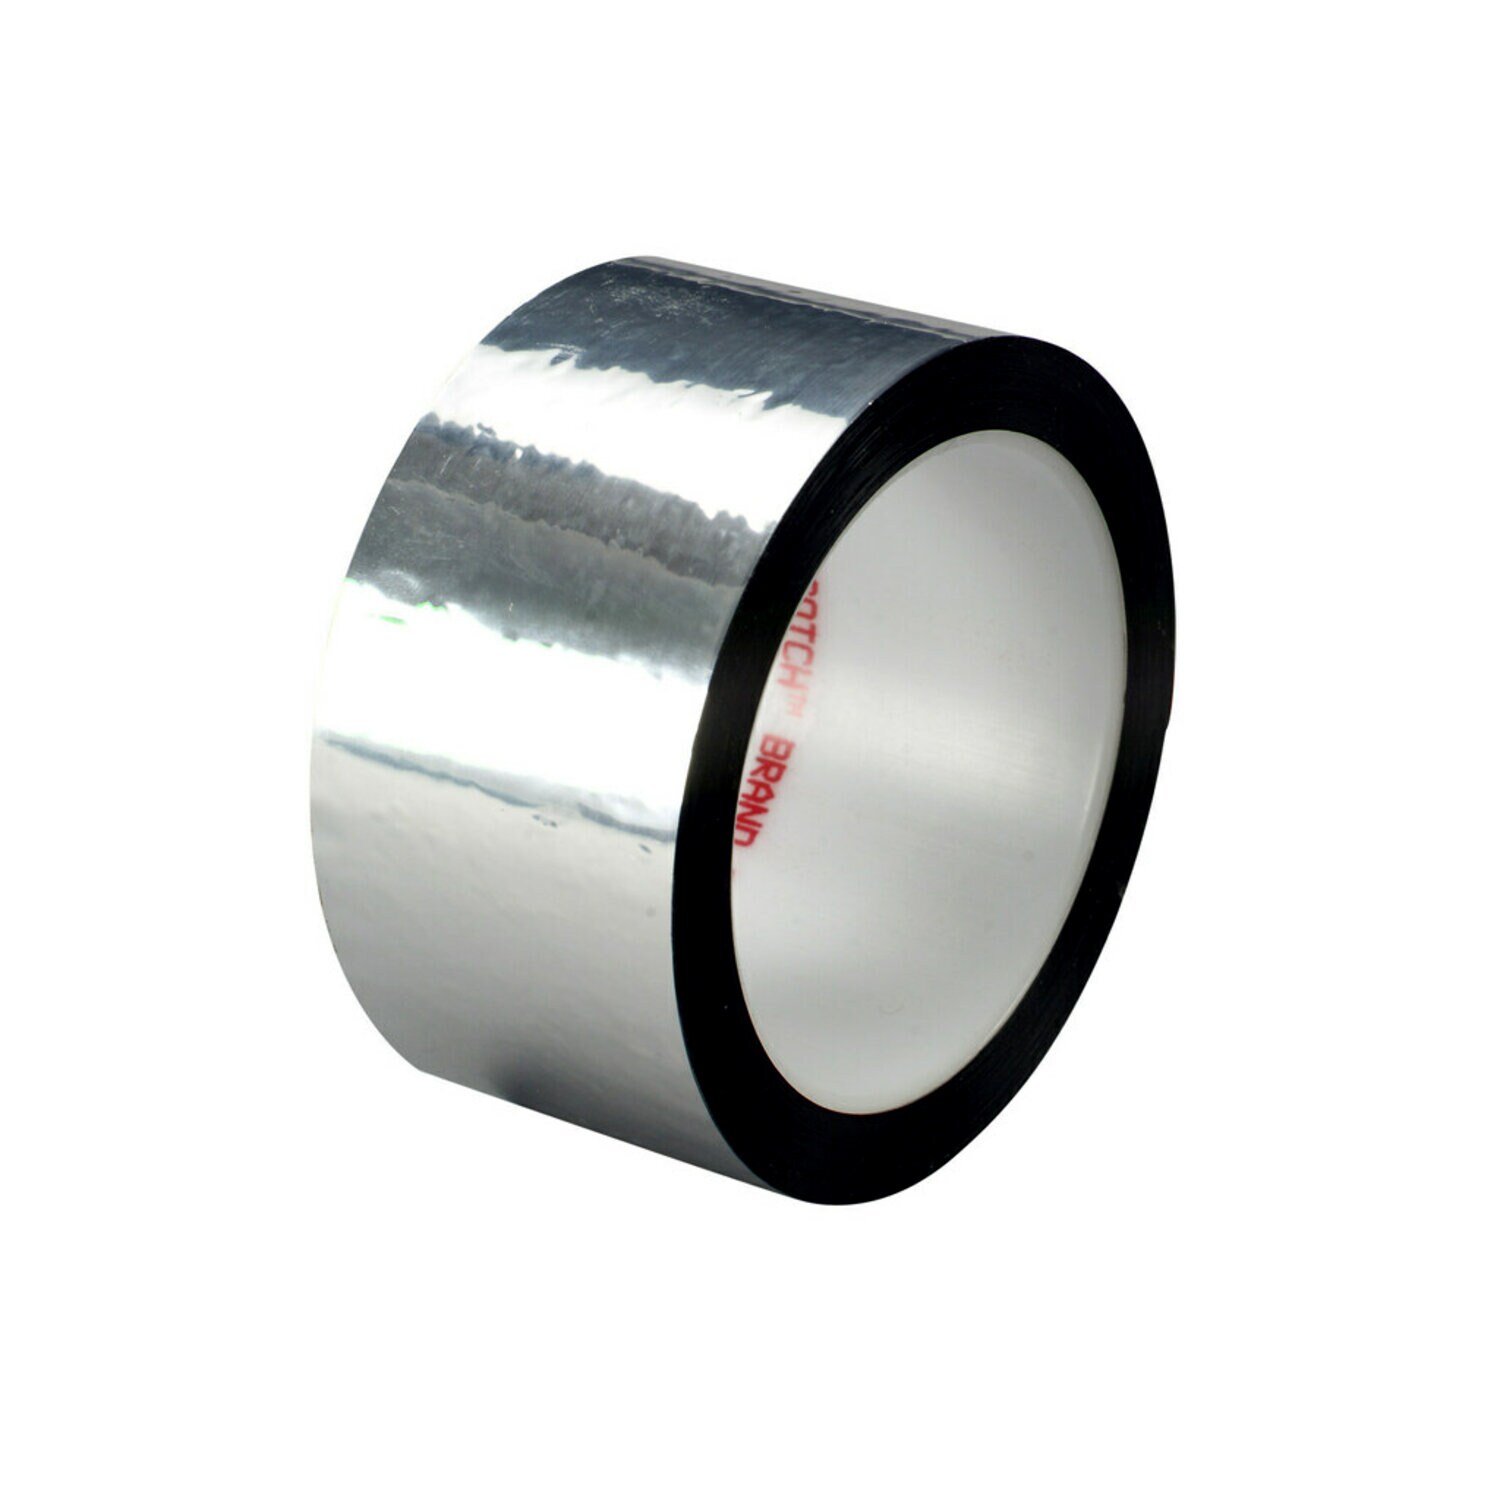 2 Rolls Gray Silver With Silver Foil Wire Deco Mesh 10 In X 30 Ft,basic  Metallic Mesh Ribbon Poly Deco Mesh Rolls